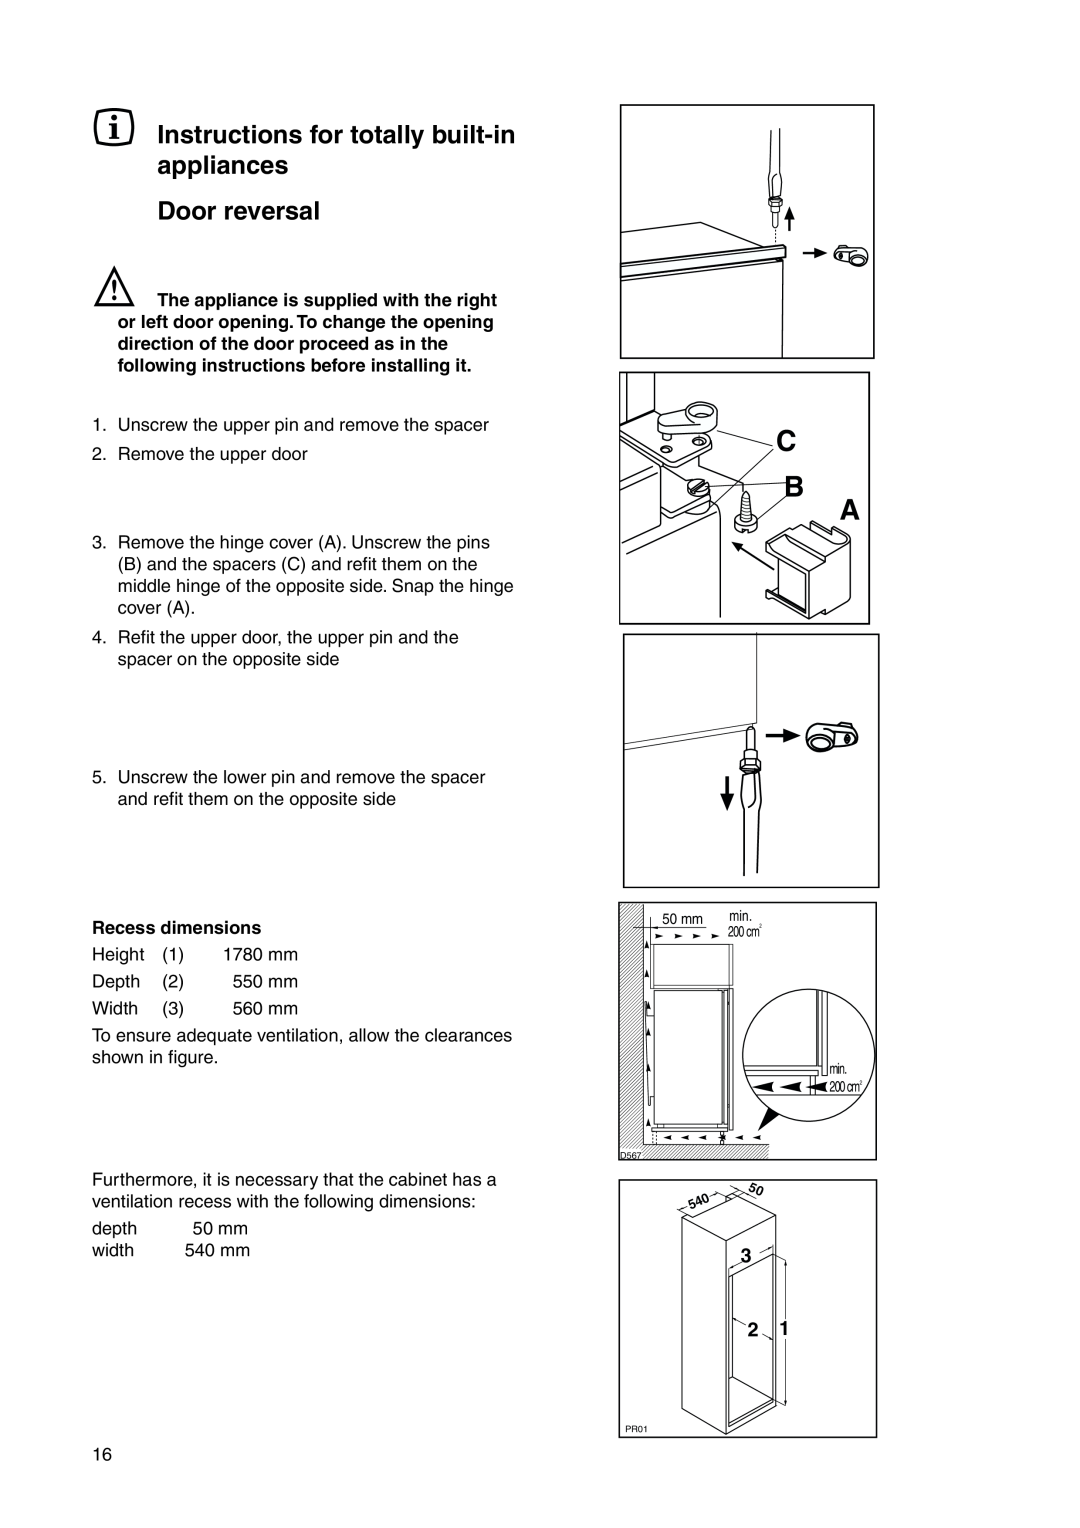 Zanussi ZI 921/8 FF manual Instructions for totally built-inappliances, Door reversal, Recess dimensions 